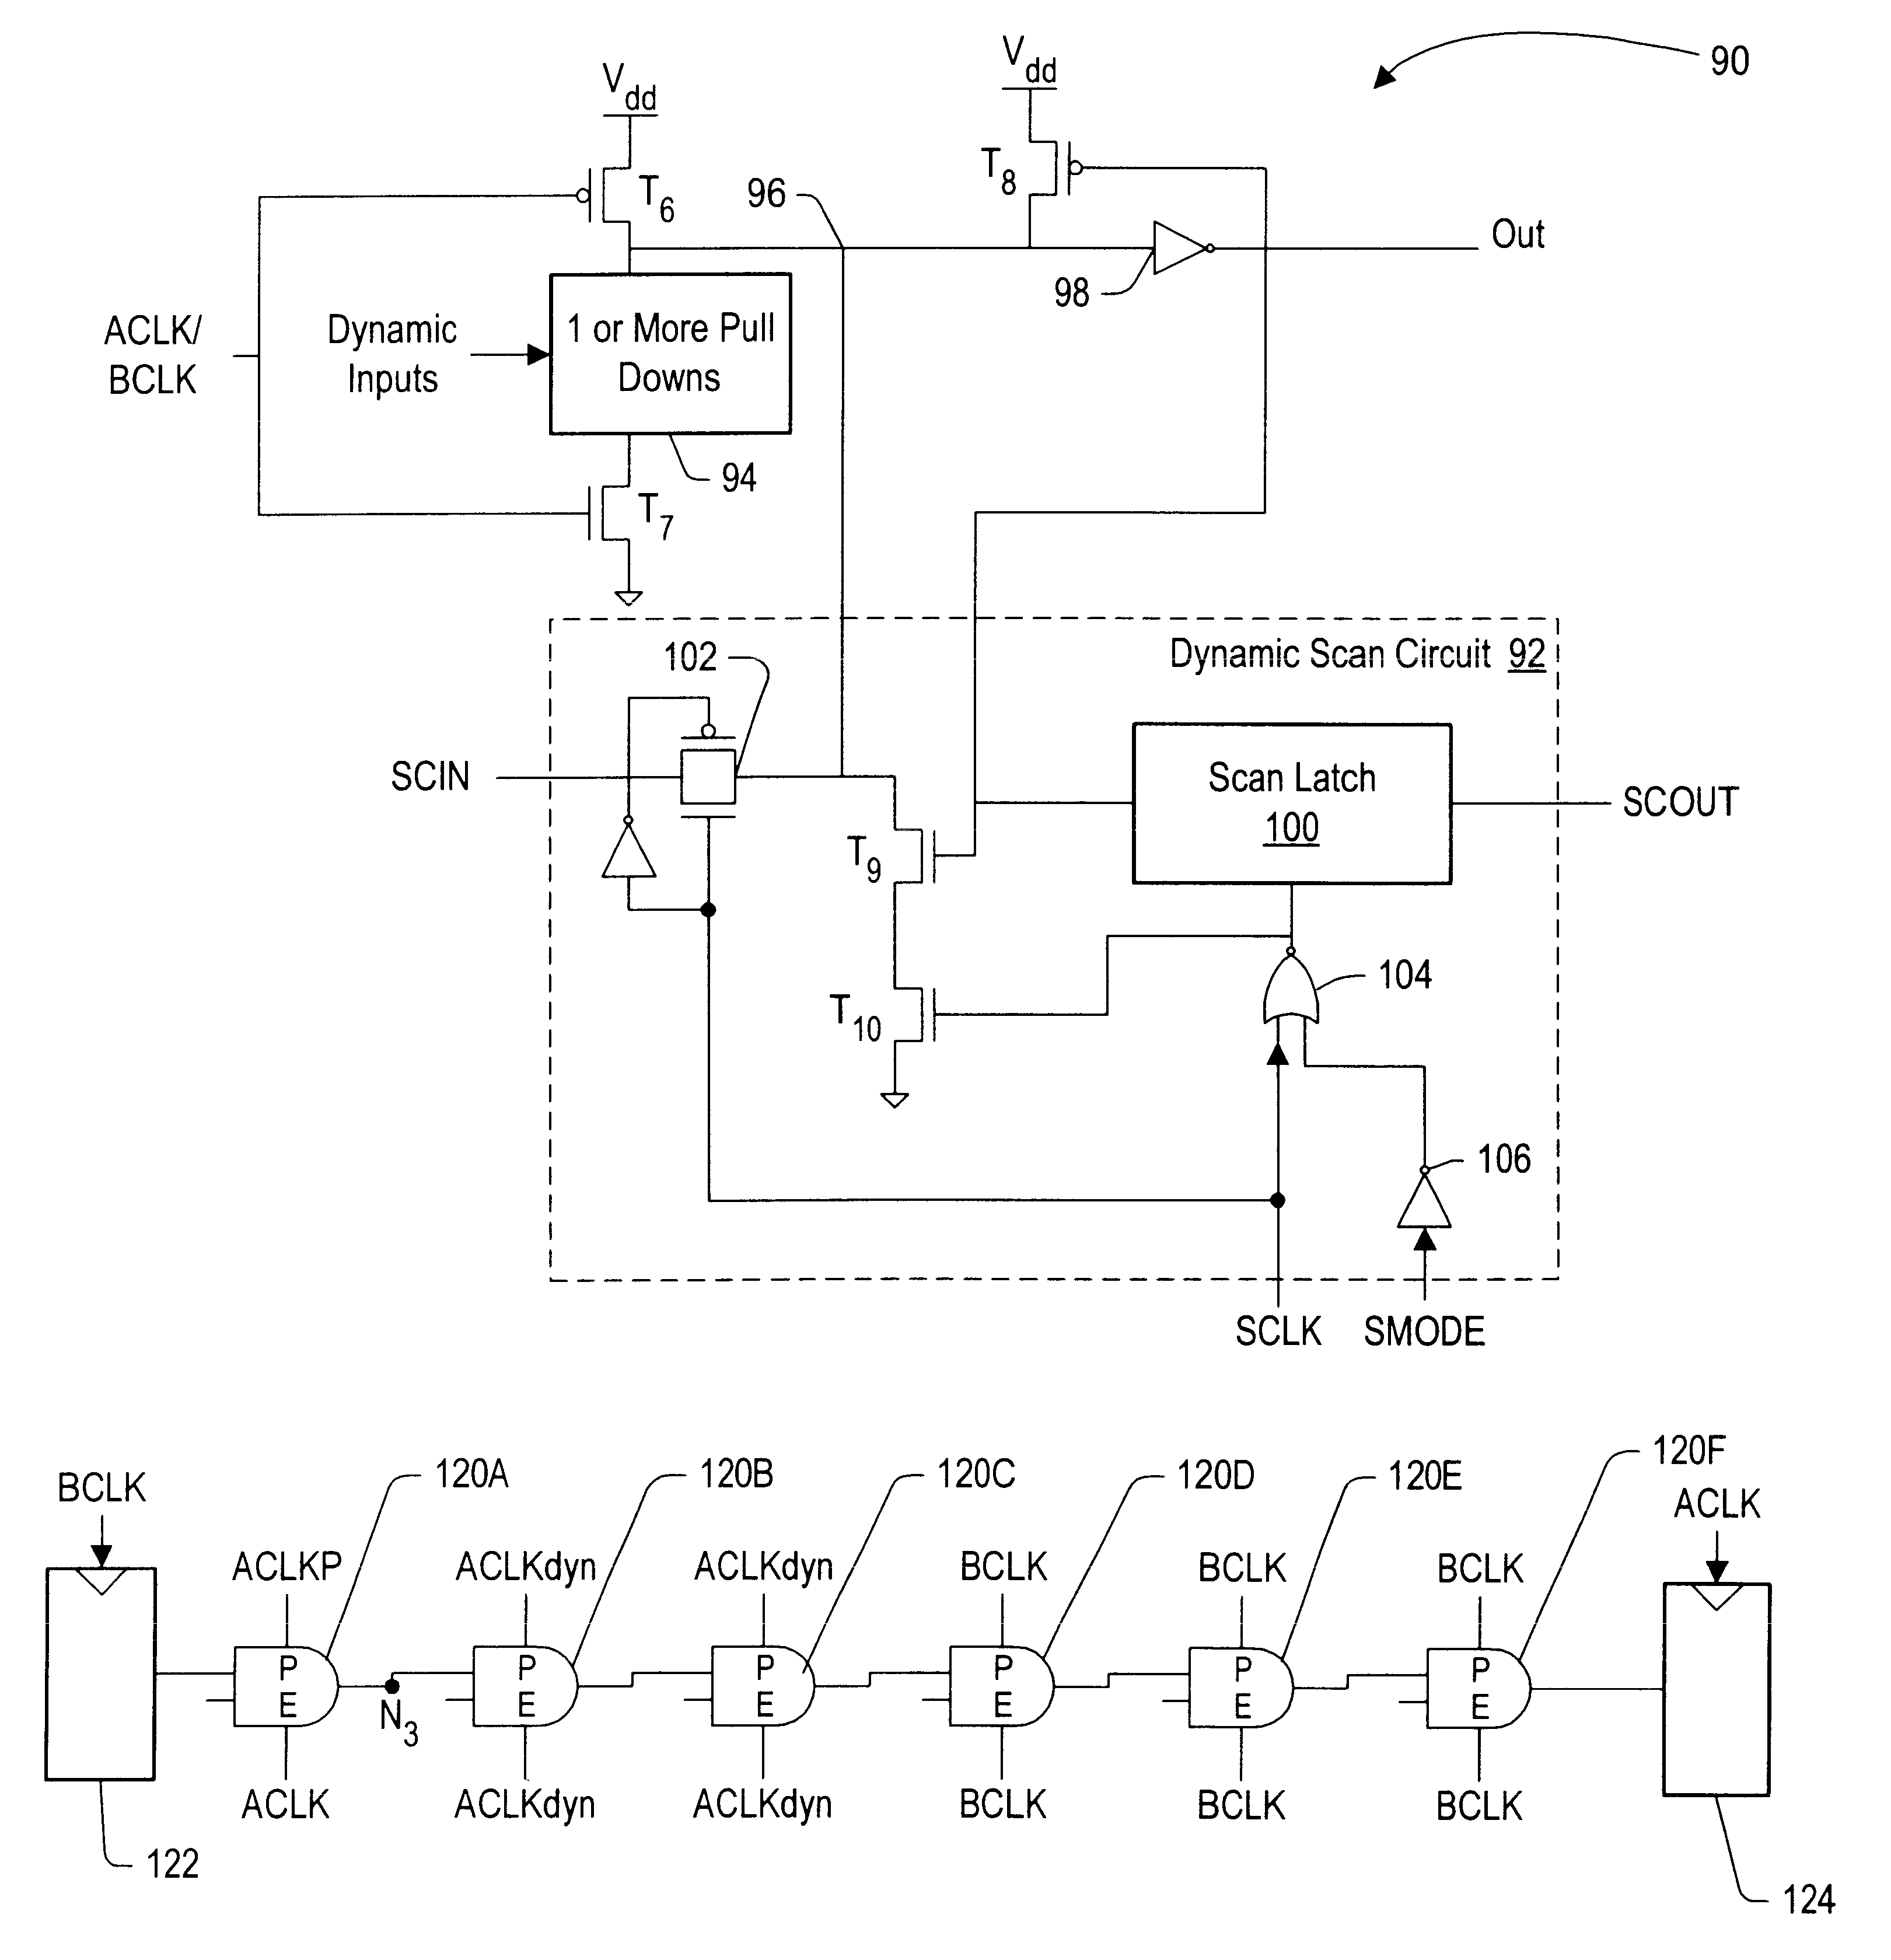 Dynamic scan circuitry for B-phase